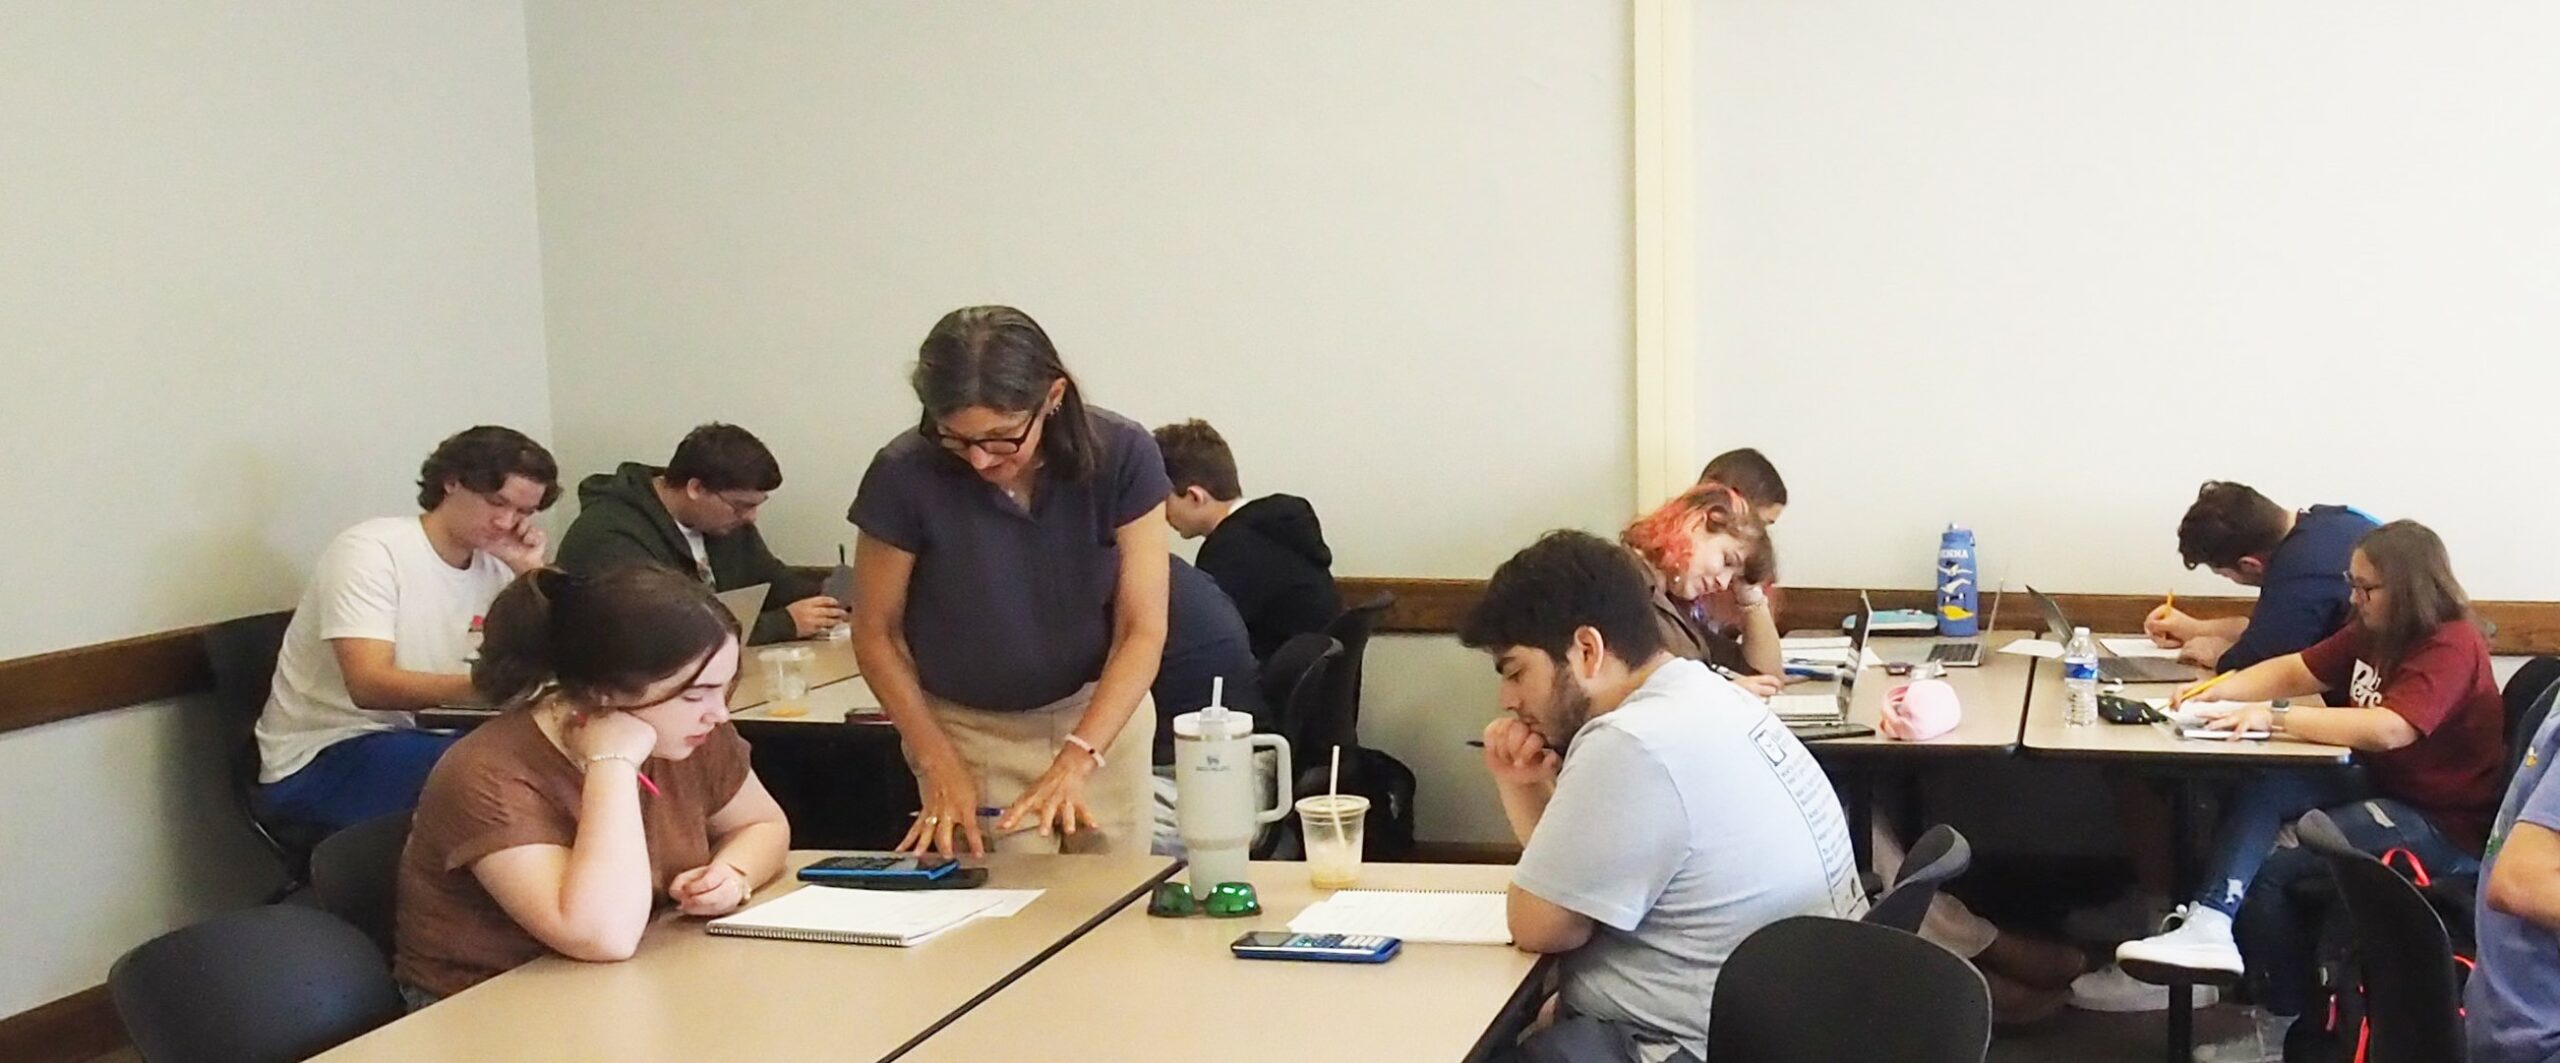 Classroom setting with students at tables and an instructor assisting a student